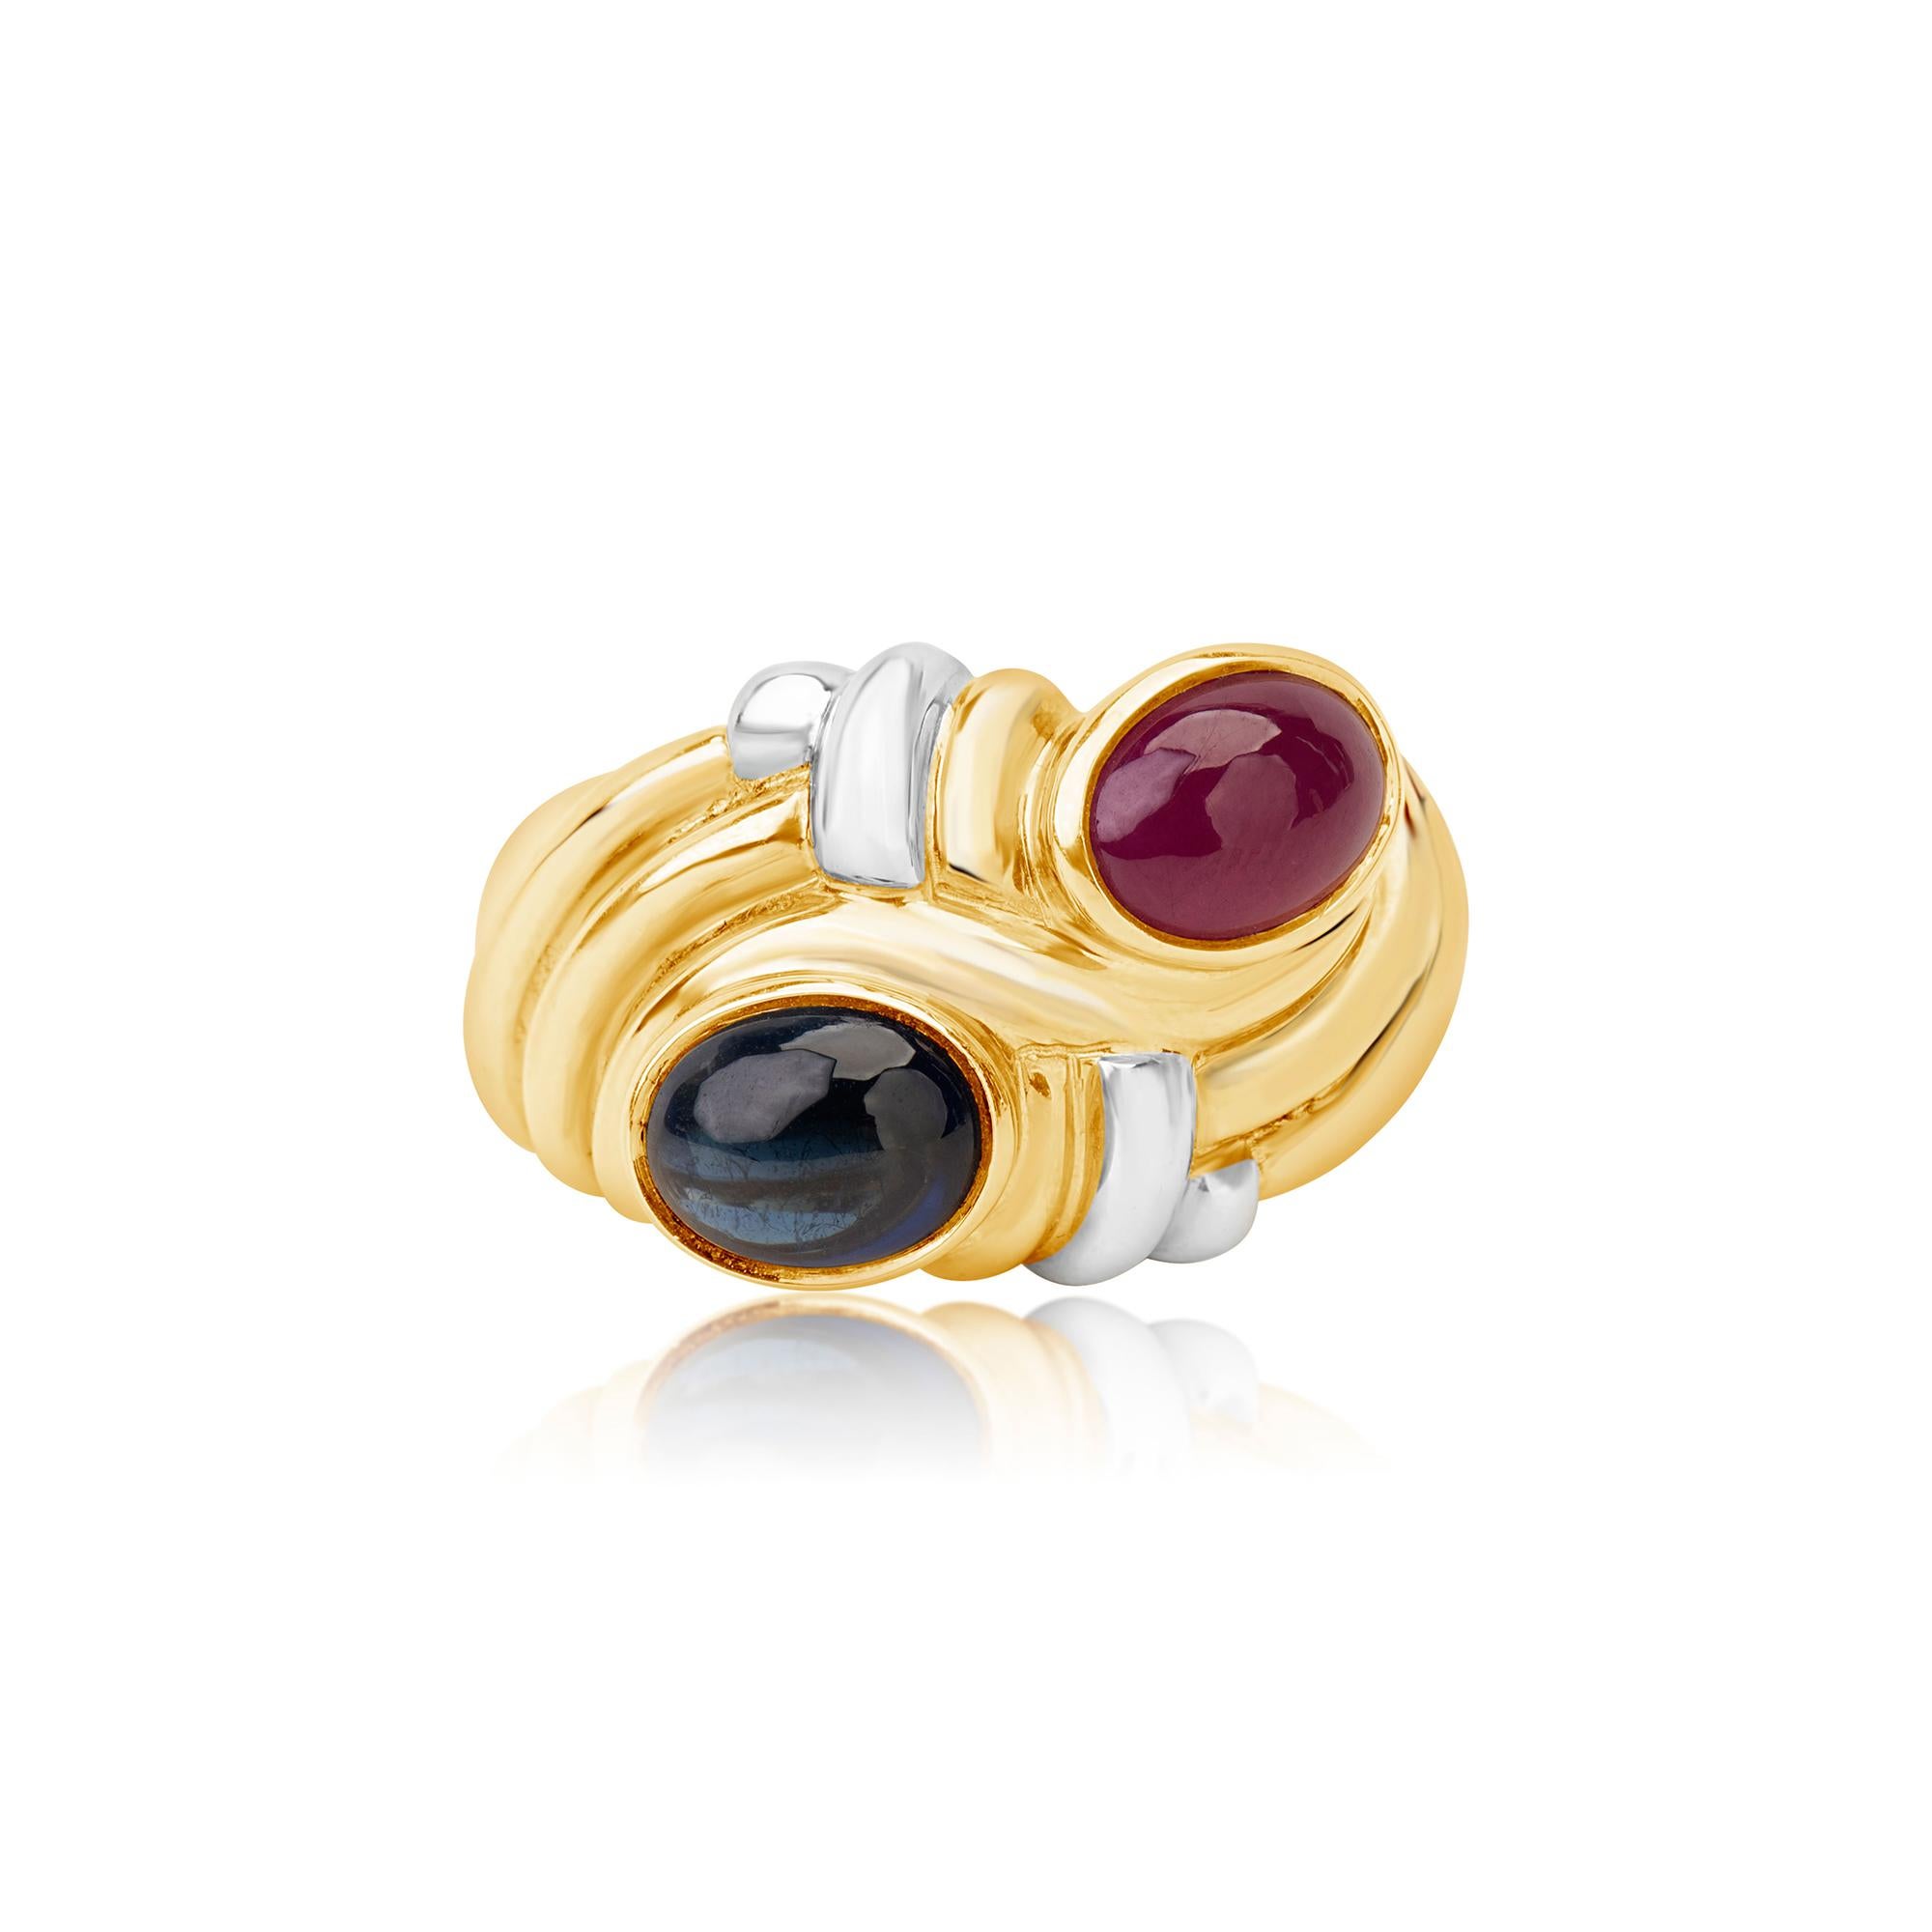 Andreoli Sapphire Ruby 18 Karat Two-Tone Gold Ring

This ring features:
- 2.84 Carat Blue Sapphire
- 2.34 Carat Ruby
- 20.86 Gram 18K Two-Tone Gold
- Made In Italy